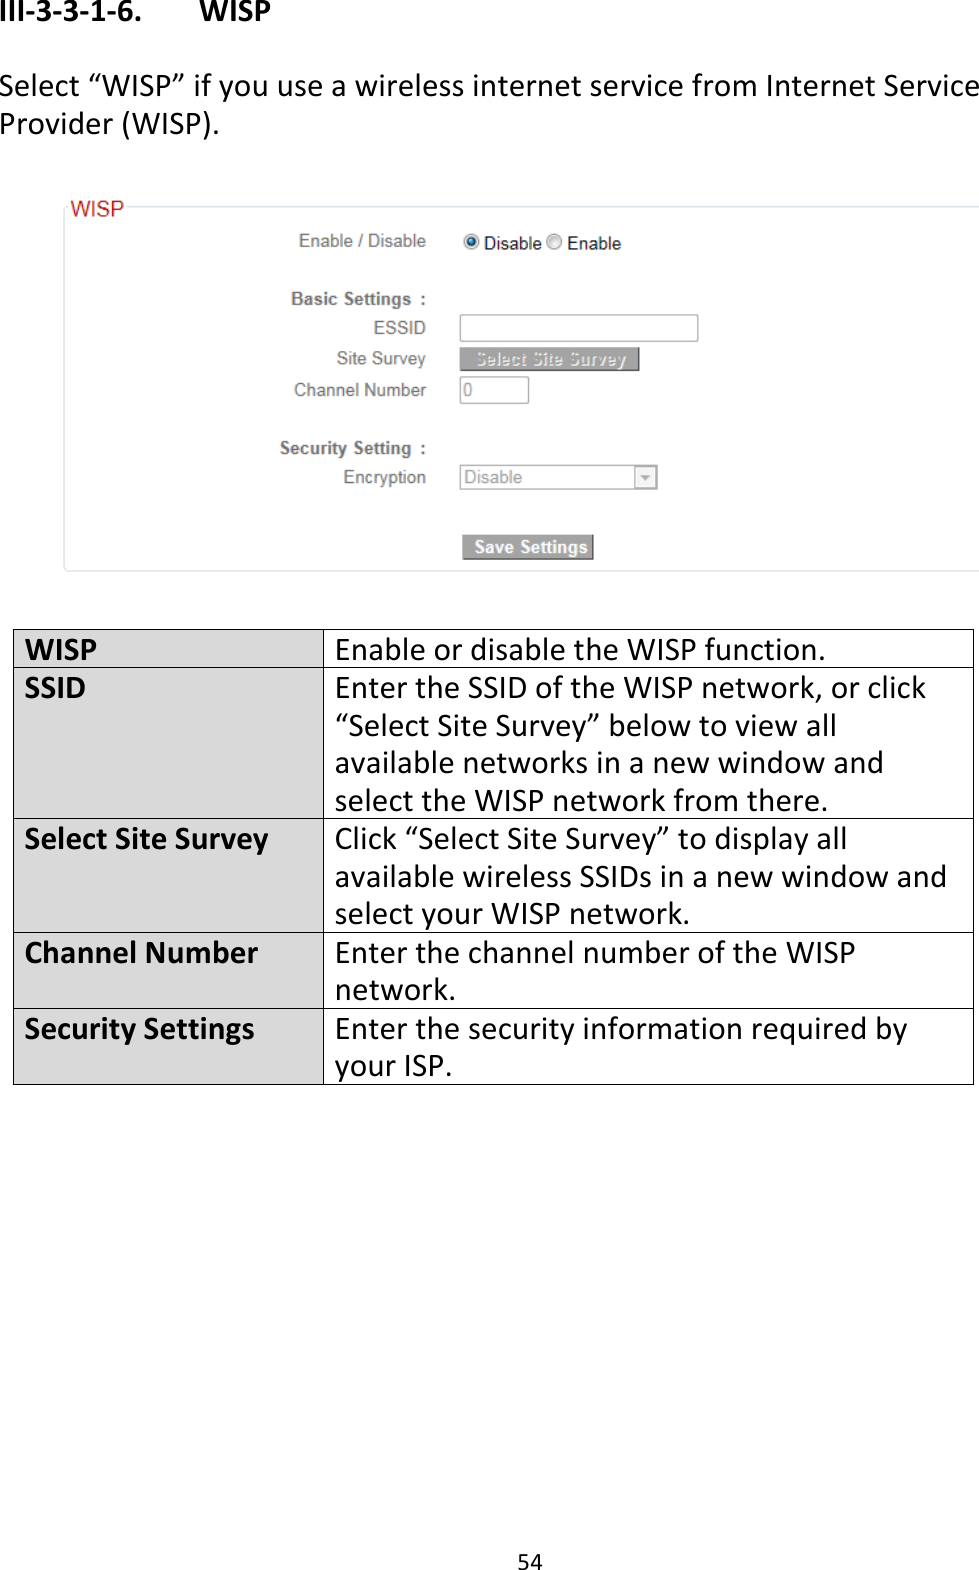 54 III-3-3-1-6.    WISP  Select “WISP” if you use a wireless internet service from Internet Service Provider (WISP).    WISP Enable or disable the WISP function. SSID Enter the SSID of the WISP network, or click “Select Site Survey” below to view all available networks in a new window and select the WISP network from there. Select Site Survey Click “Select Site Survey” to display all available wireless SSIDs in a new window and select your WISP network. Channel Number Enter the channel number of the WISP network. Security Settings Enter the security information required by your ISP.  